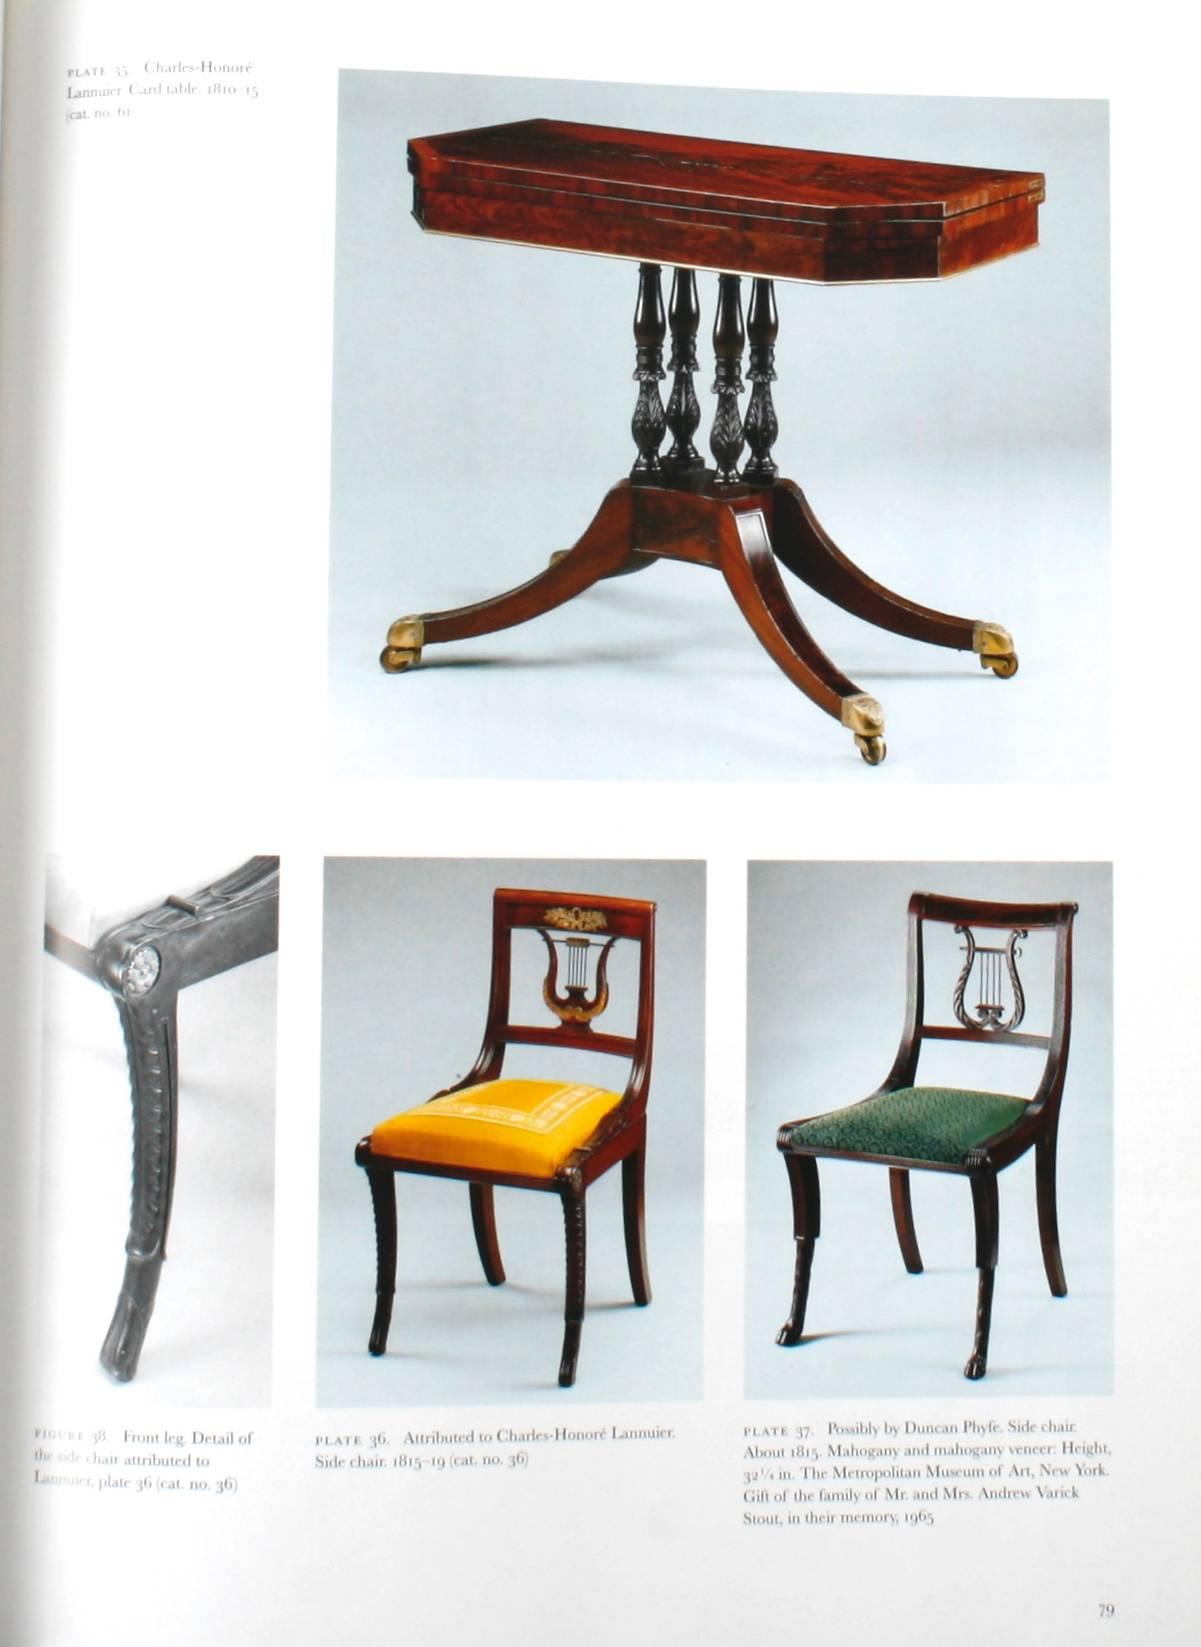 Paper Honoré Lannuier Cabinetmaker from Paris: The Life and Work of a French Ébéniste For Sale